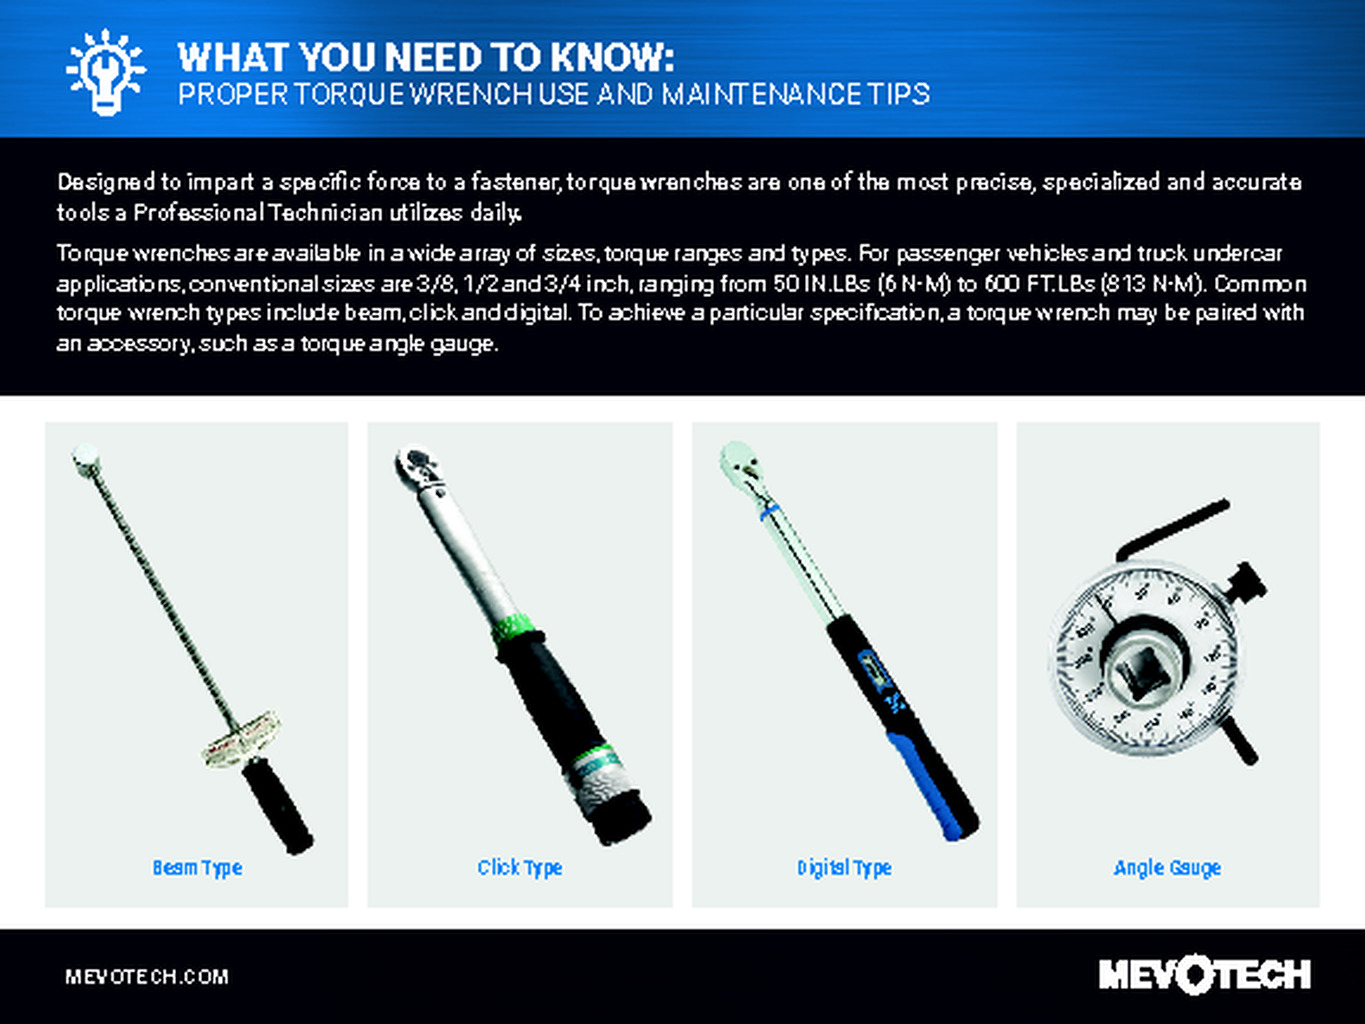 WHAT YOU NEED TO KNOW: PROPER TORQUE WRENCH USE AND MAINTENANCE TIPS